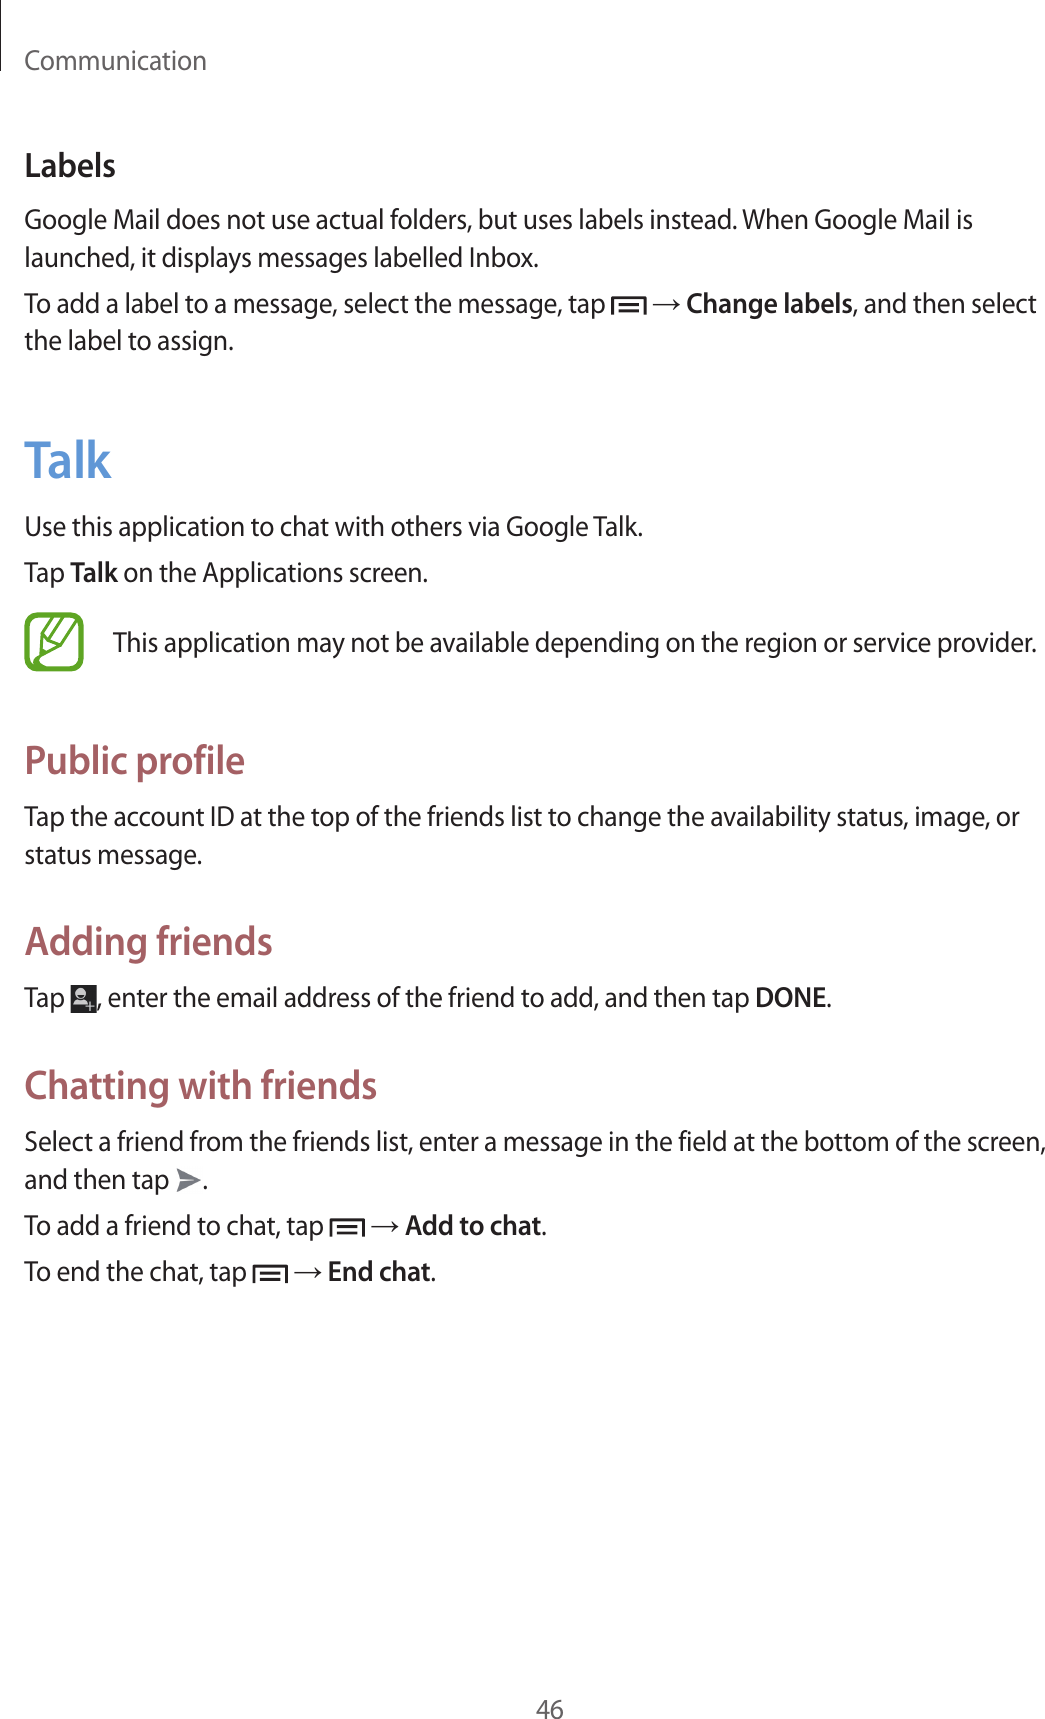 Communication46LabelsGoogle Mail does not use actual folders, but uses labels instead. When Google Mail is launched, it displays messages labelled Inbox.To add a label to a message, select the message, tap   → Change labels, and then select the label to assign.TalkUse this application to chat with others via Google Talk.Tap Talk on the Applications screen.This application may not be available depending on the region or service provider.Public profileTap the account ID at the top of the friends list to change the availability status, image, or status message.Adding friendsTap  , enter the email address of the friend to add, and then tap DONE.Chatting with friendsSelect a friend from the friends list, enter a message in the field at the bottom of the screen, and then tap  .To add a friend to chat, tap   → Add to chat.To end the chat, tap   → End chat.